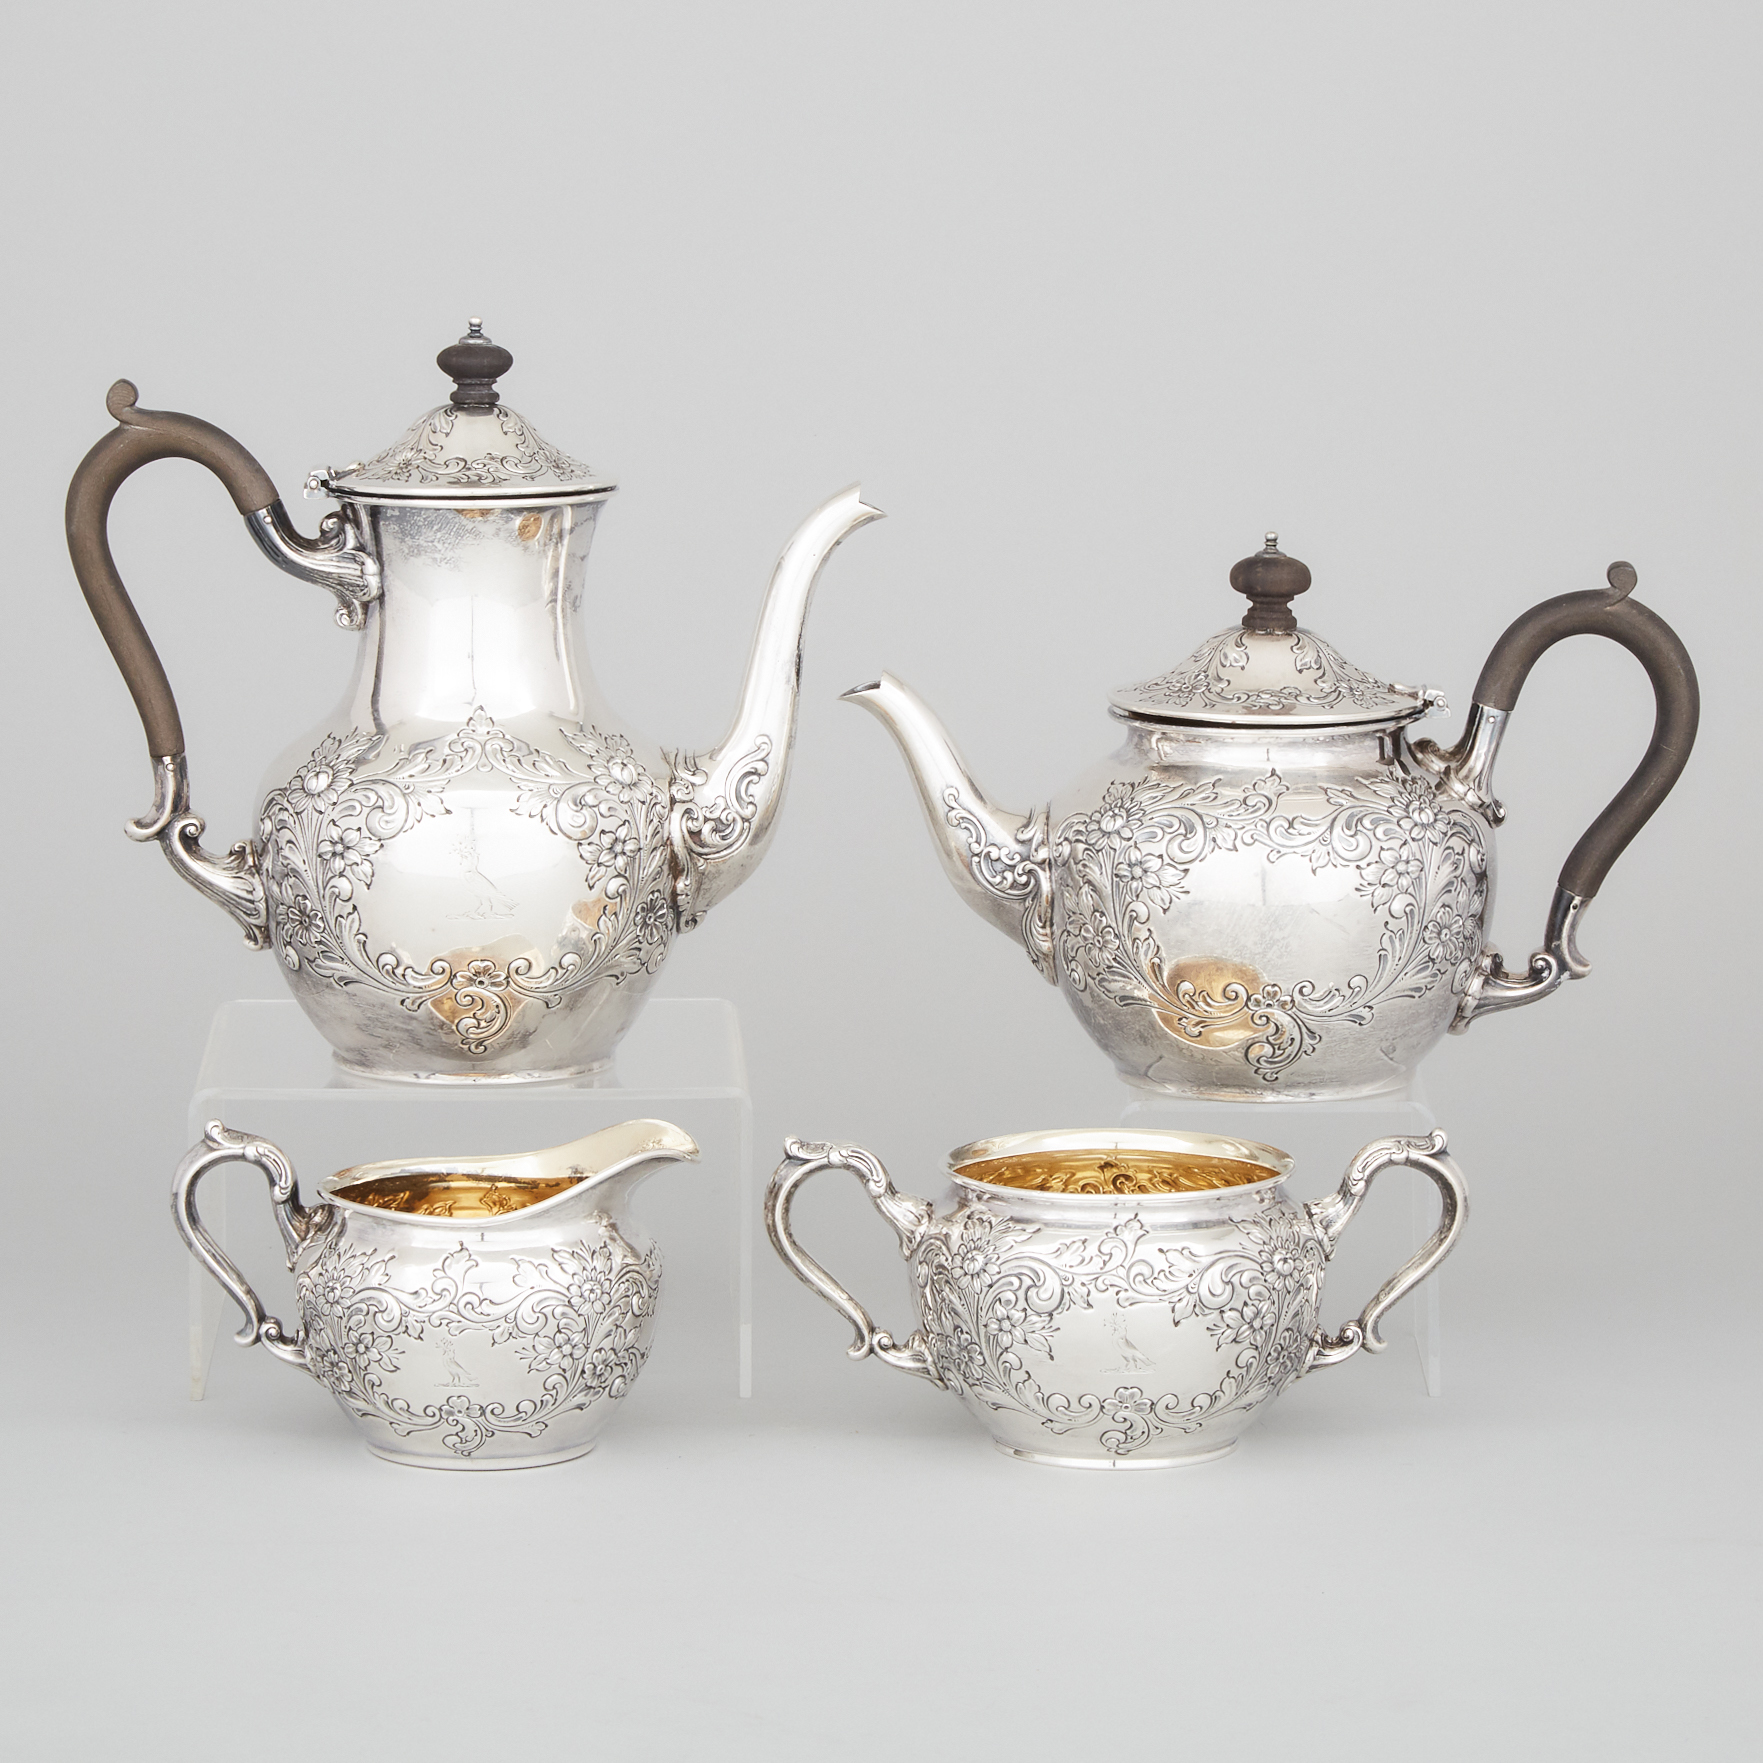 Canadian Silver Tea and Coffee Service, Henry Birks & Sons, Montreal, Que., 1904-24